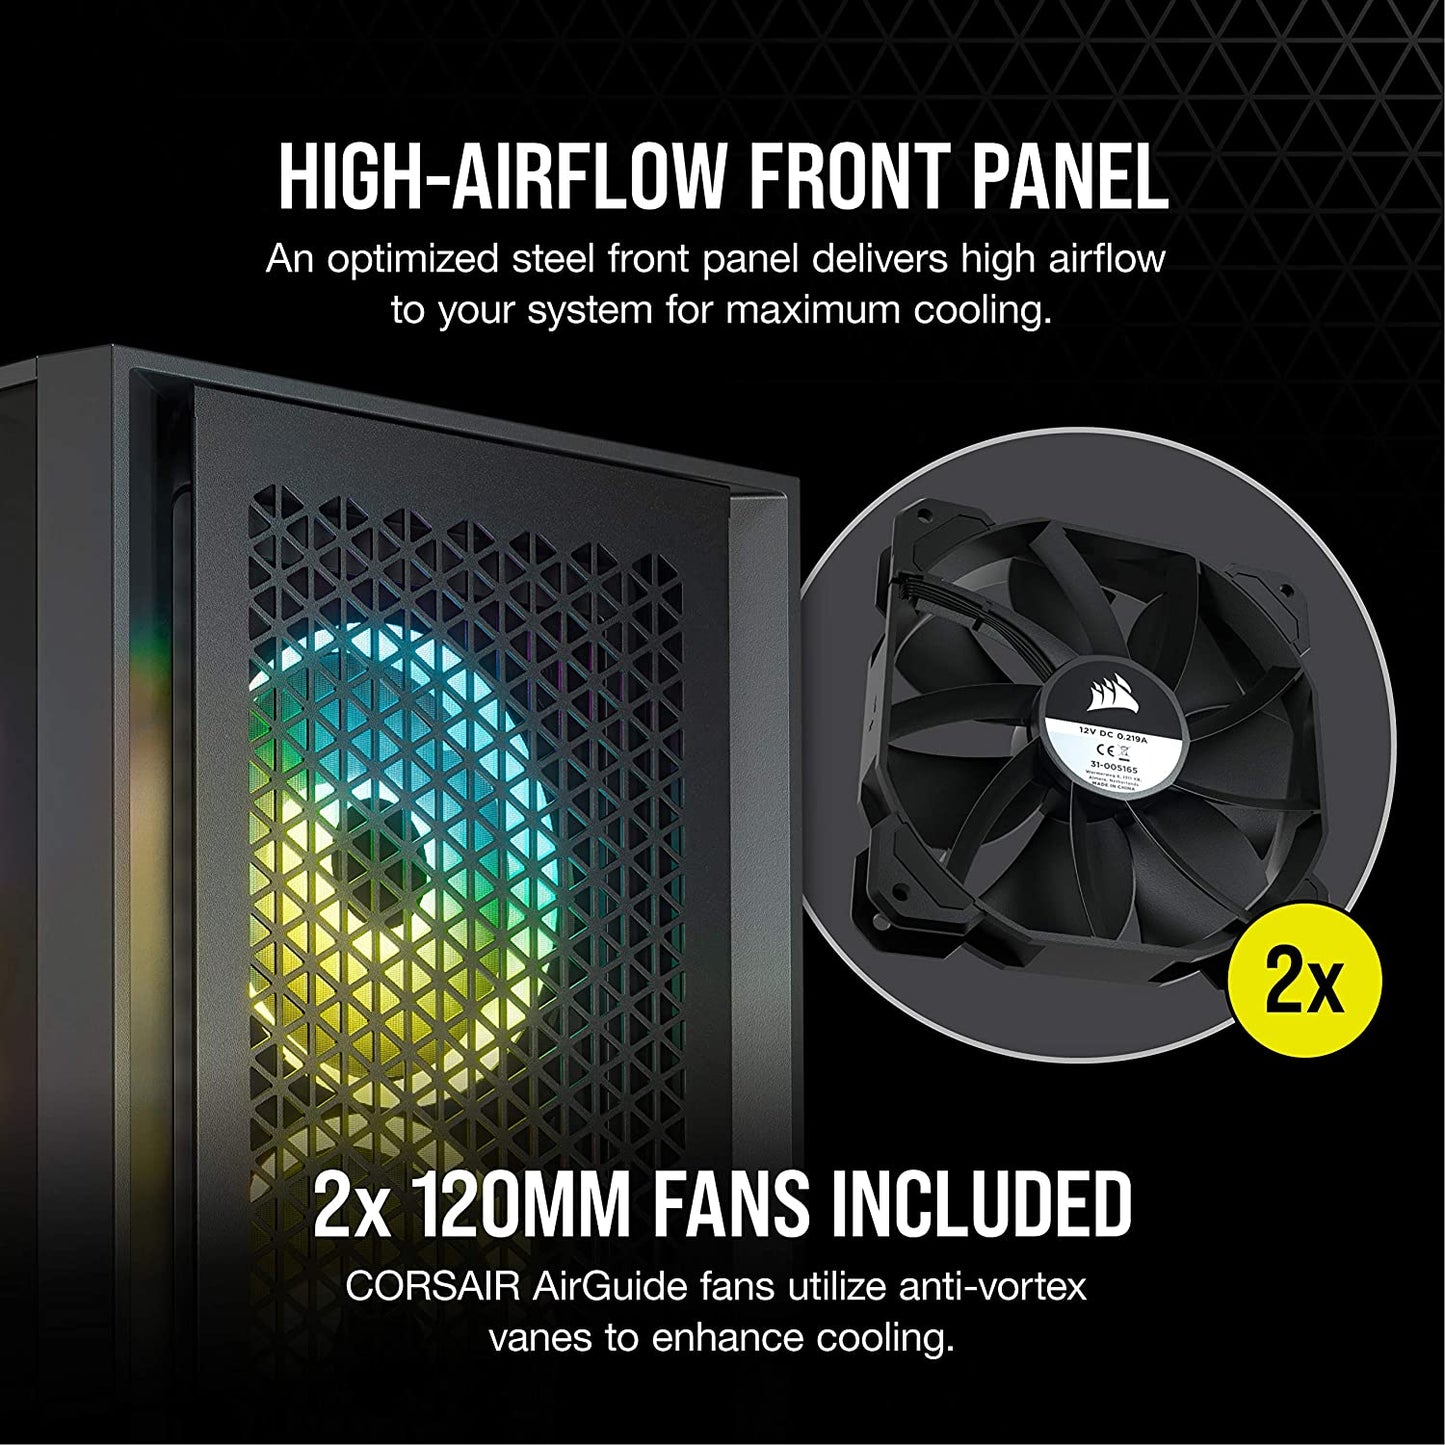 Corsair Tempered Glass, Alloy Steel 4000D Airflow Tempered Glass Mid-Tower ATX Case, Black (CC-9011200-WW)